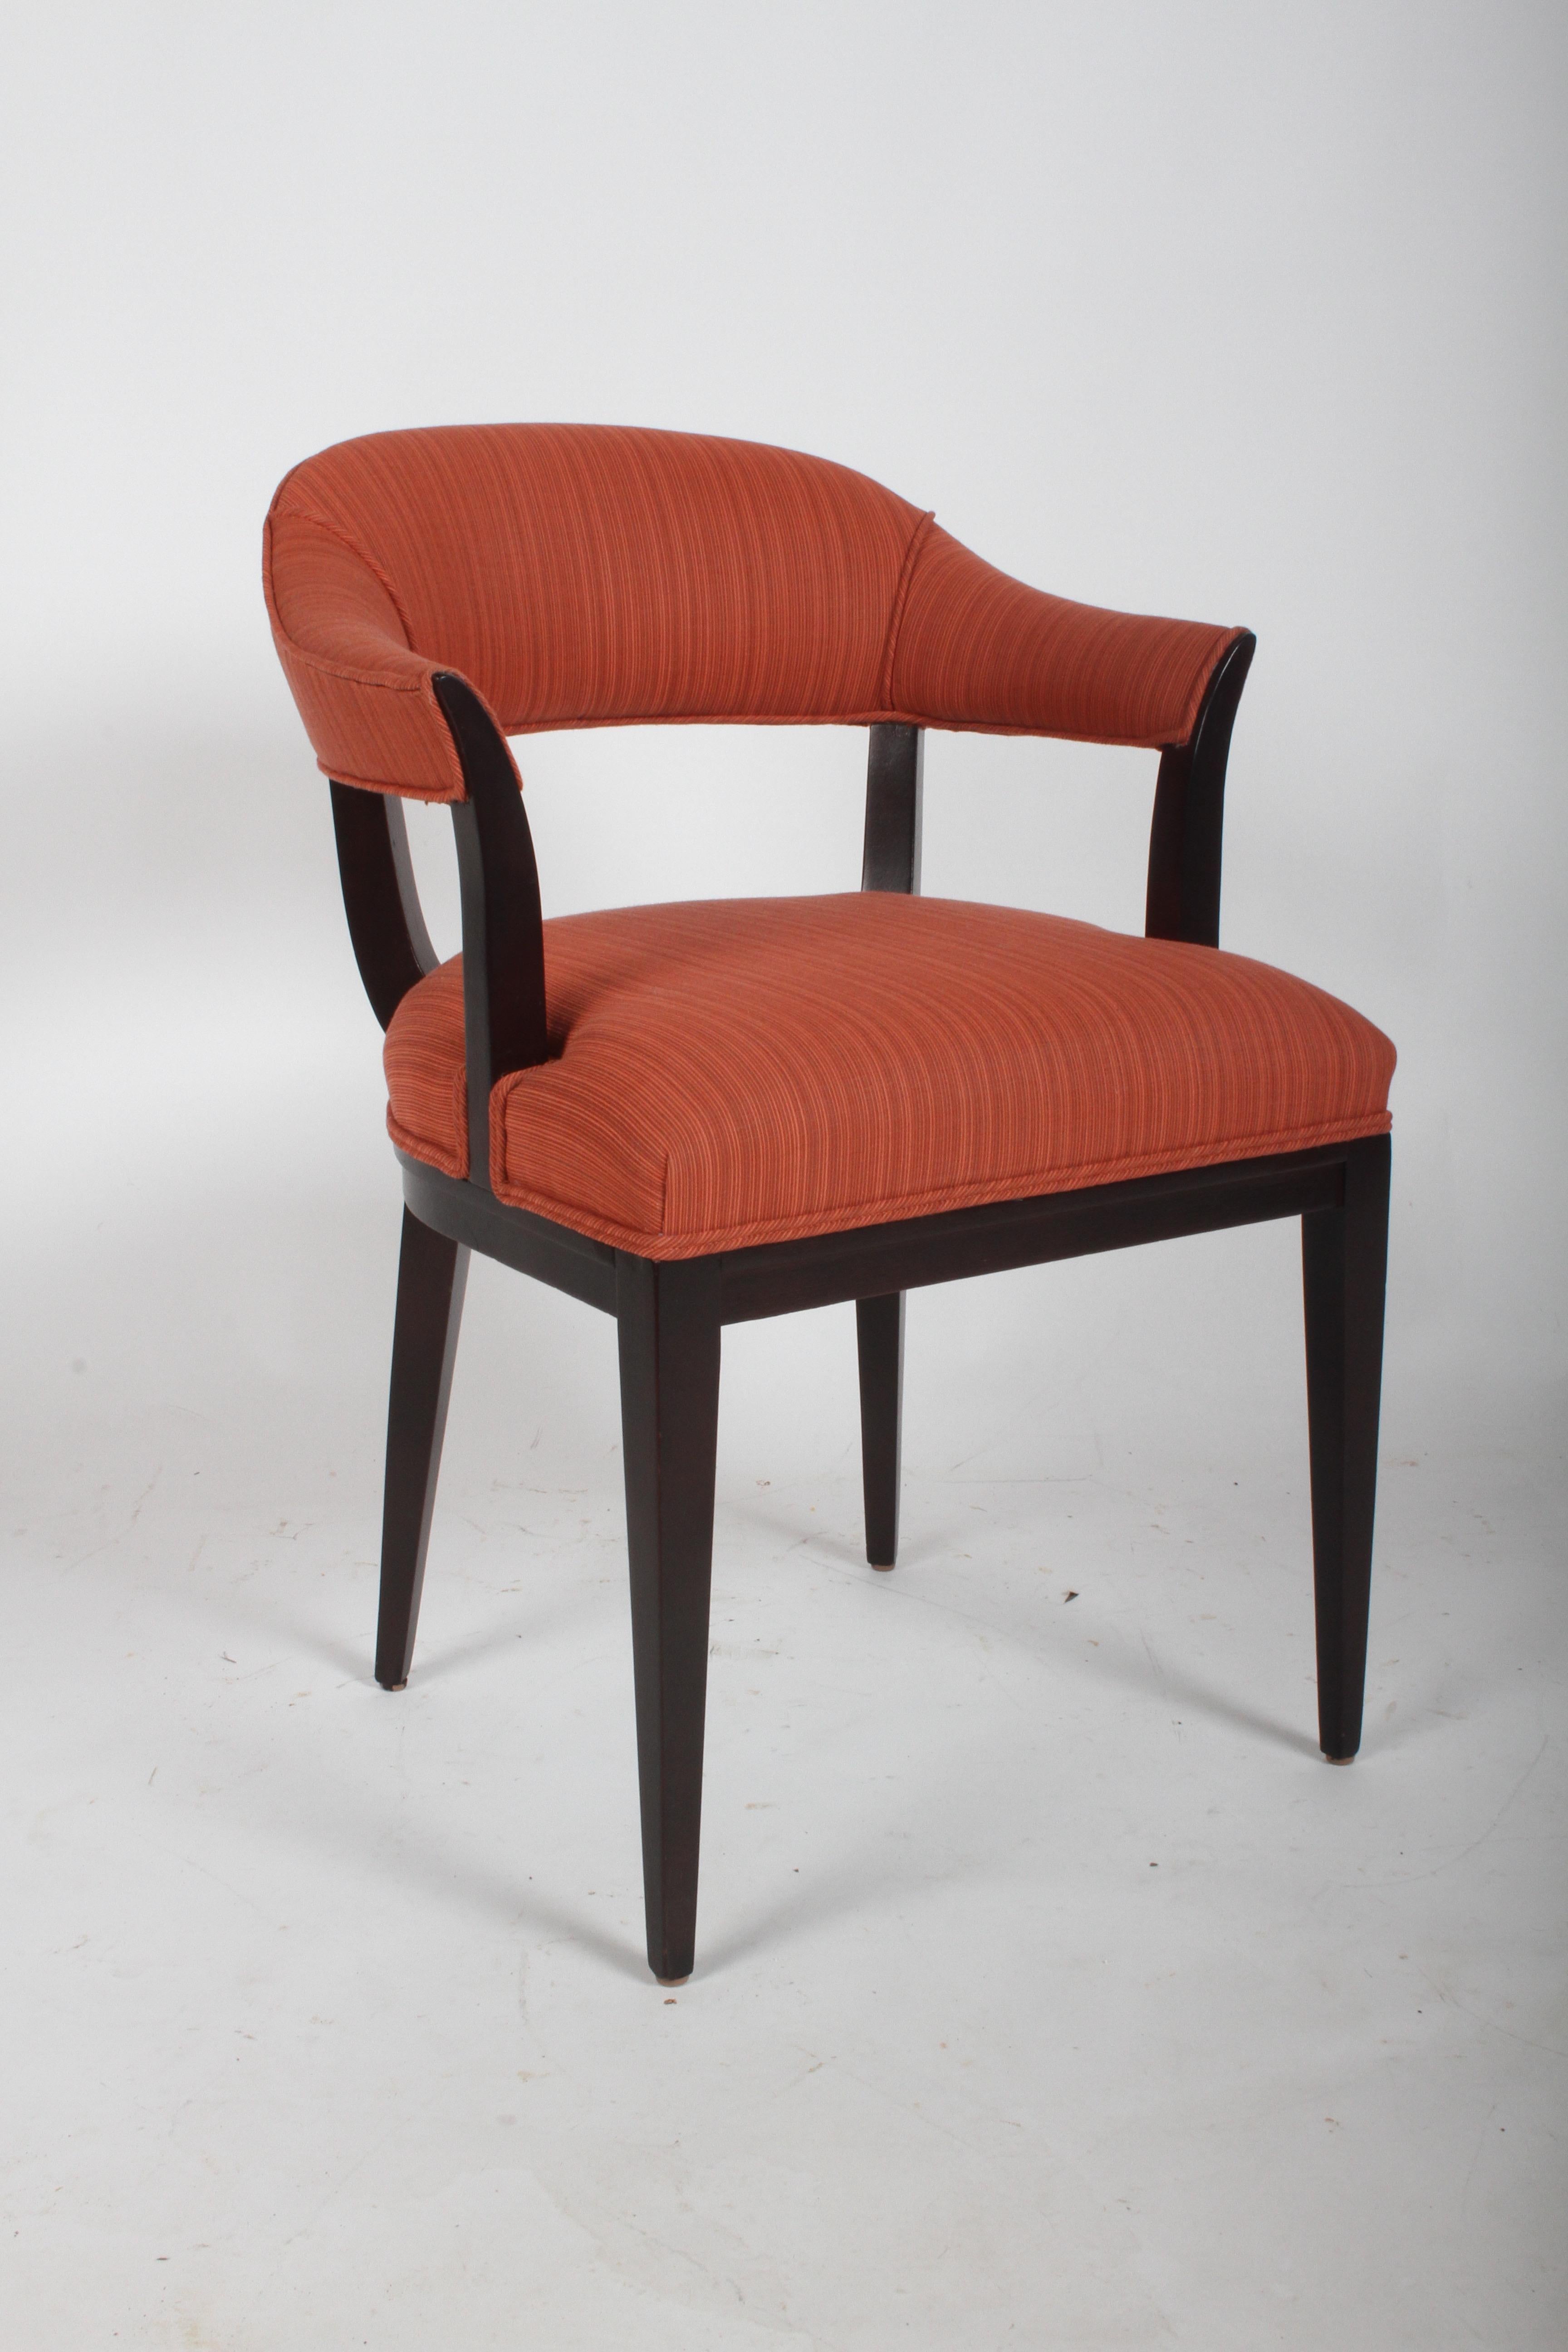 Early 1940s Edward J. Wormley Elegant Neoclassical Style occasional arm chairs for Dunbar model No. 116B. As shown in 